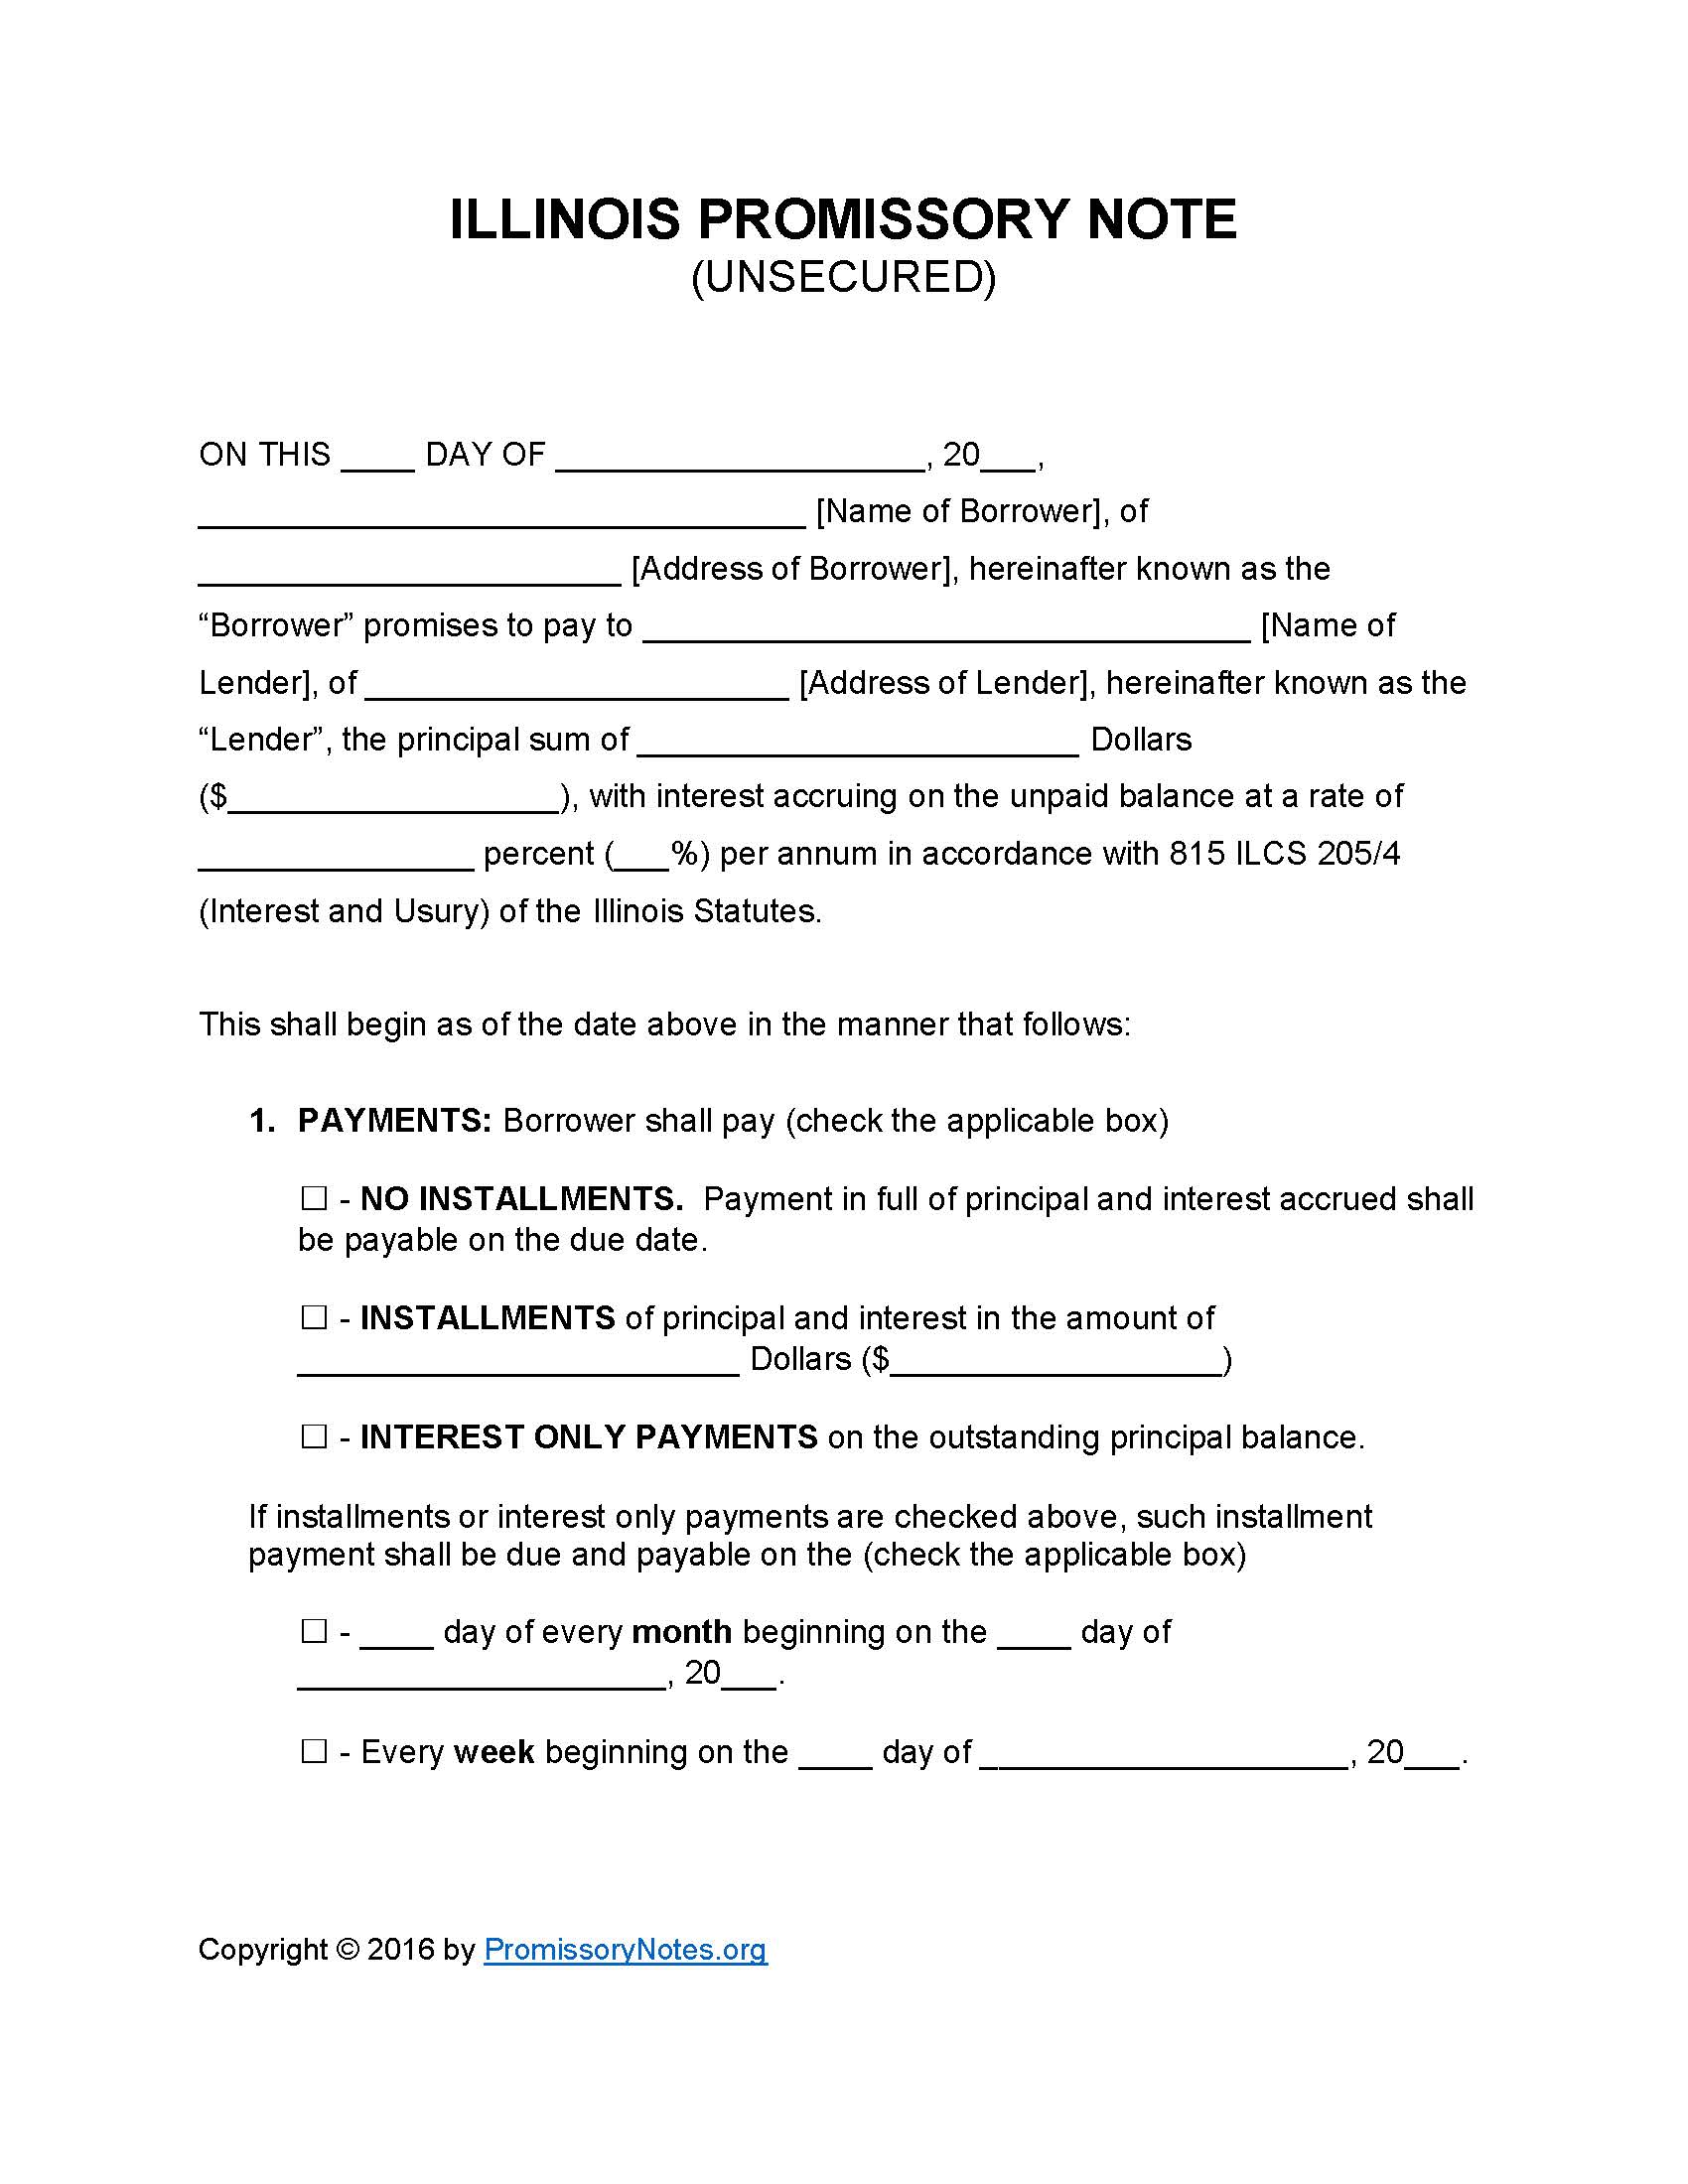 Illinois Unsecured Promissory Note Template Promissory Notes